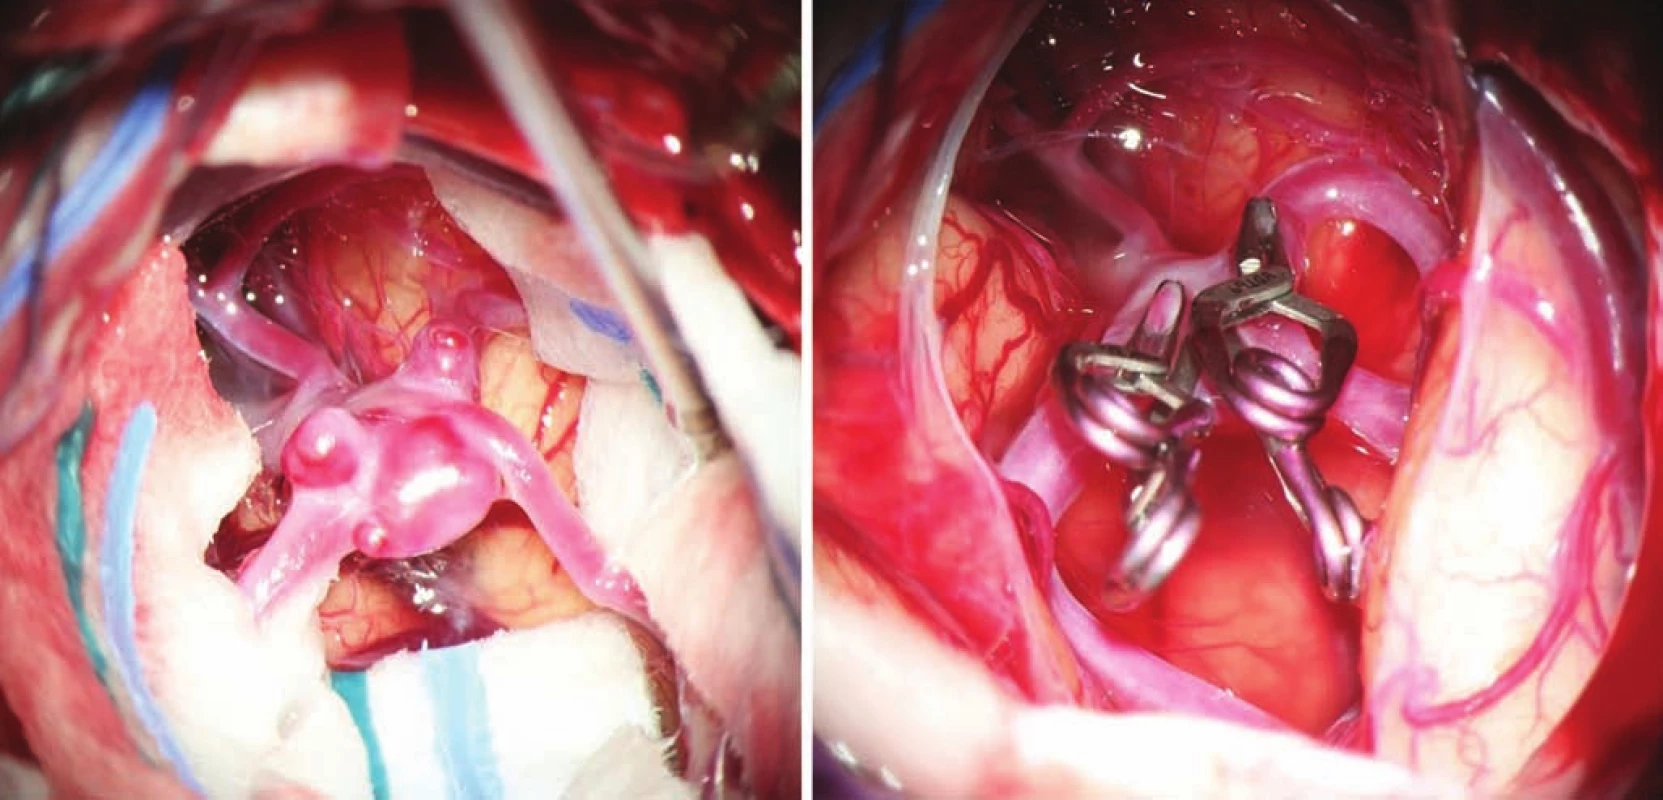 Complex multilobar middle cerebral artery aneurysm before and after clipping.